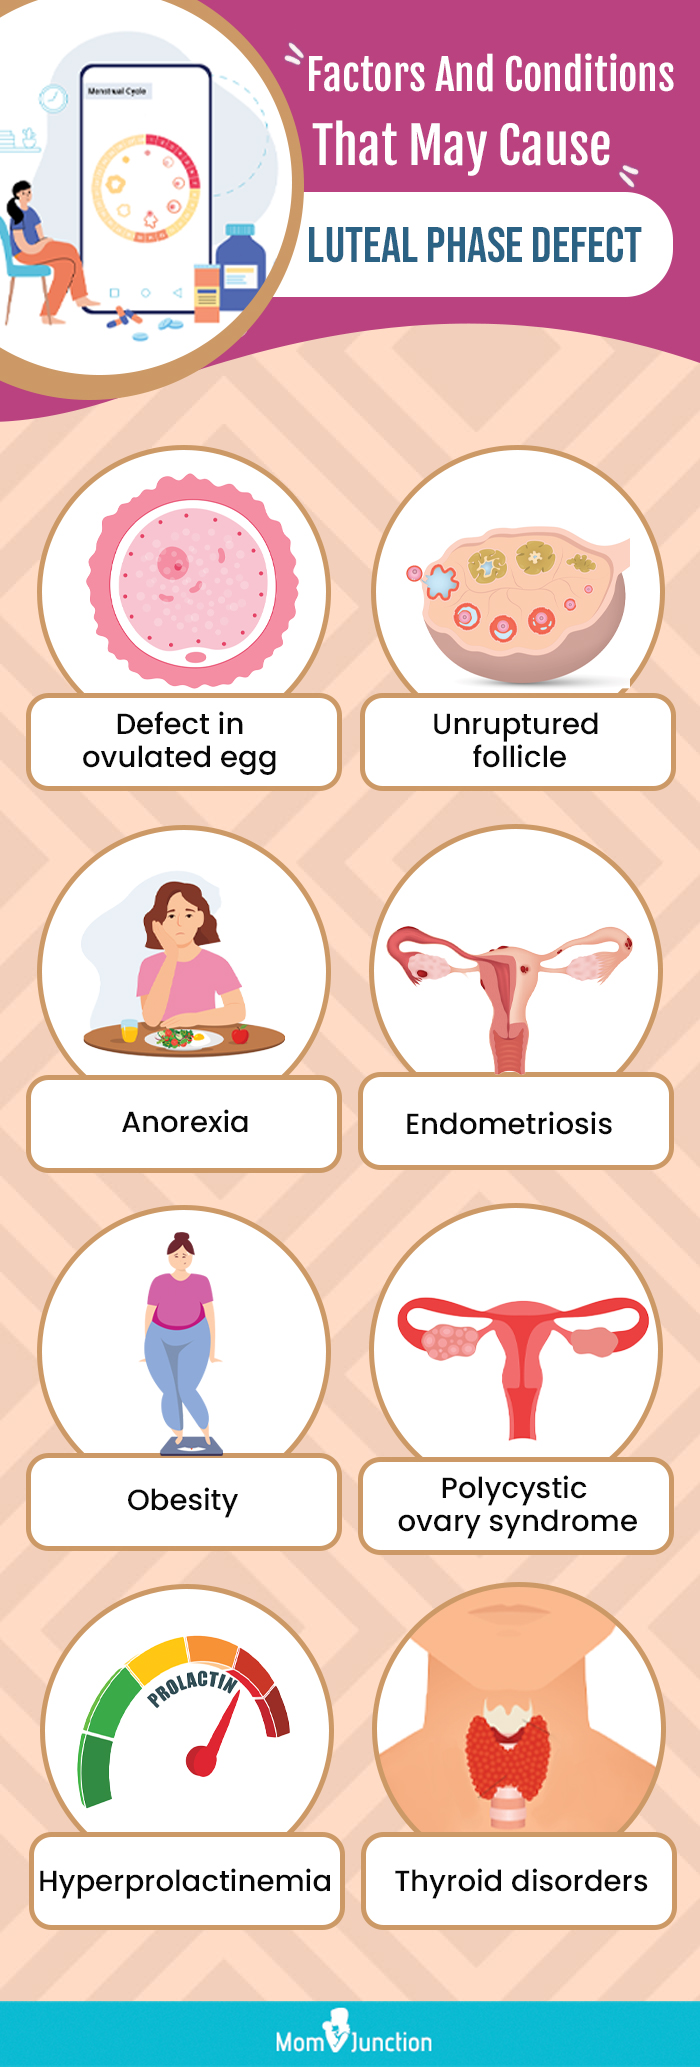 factors and conditions that may cause luteal phase defect (infographic)